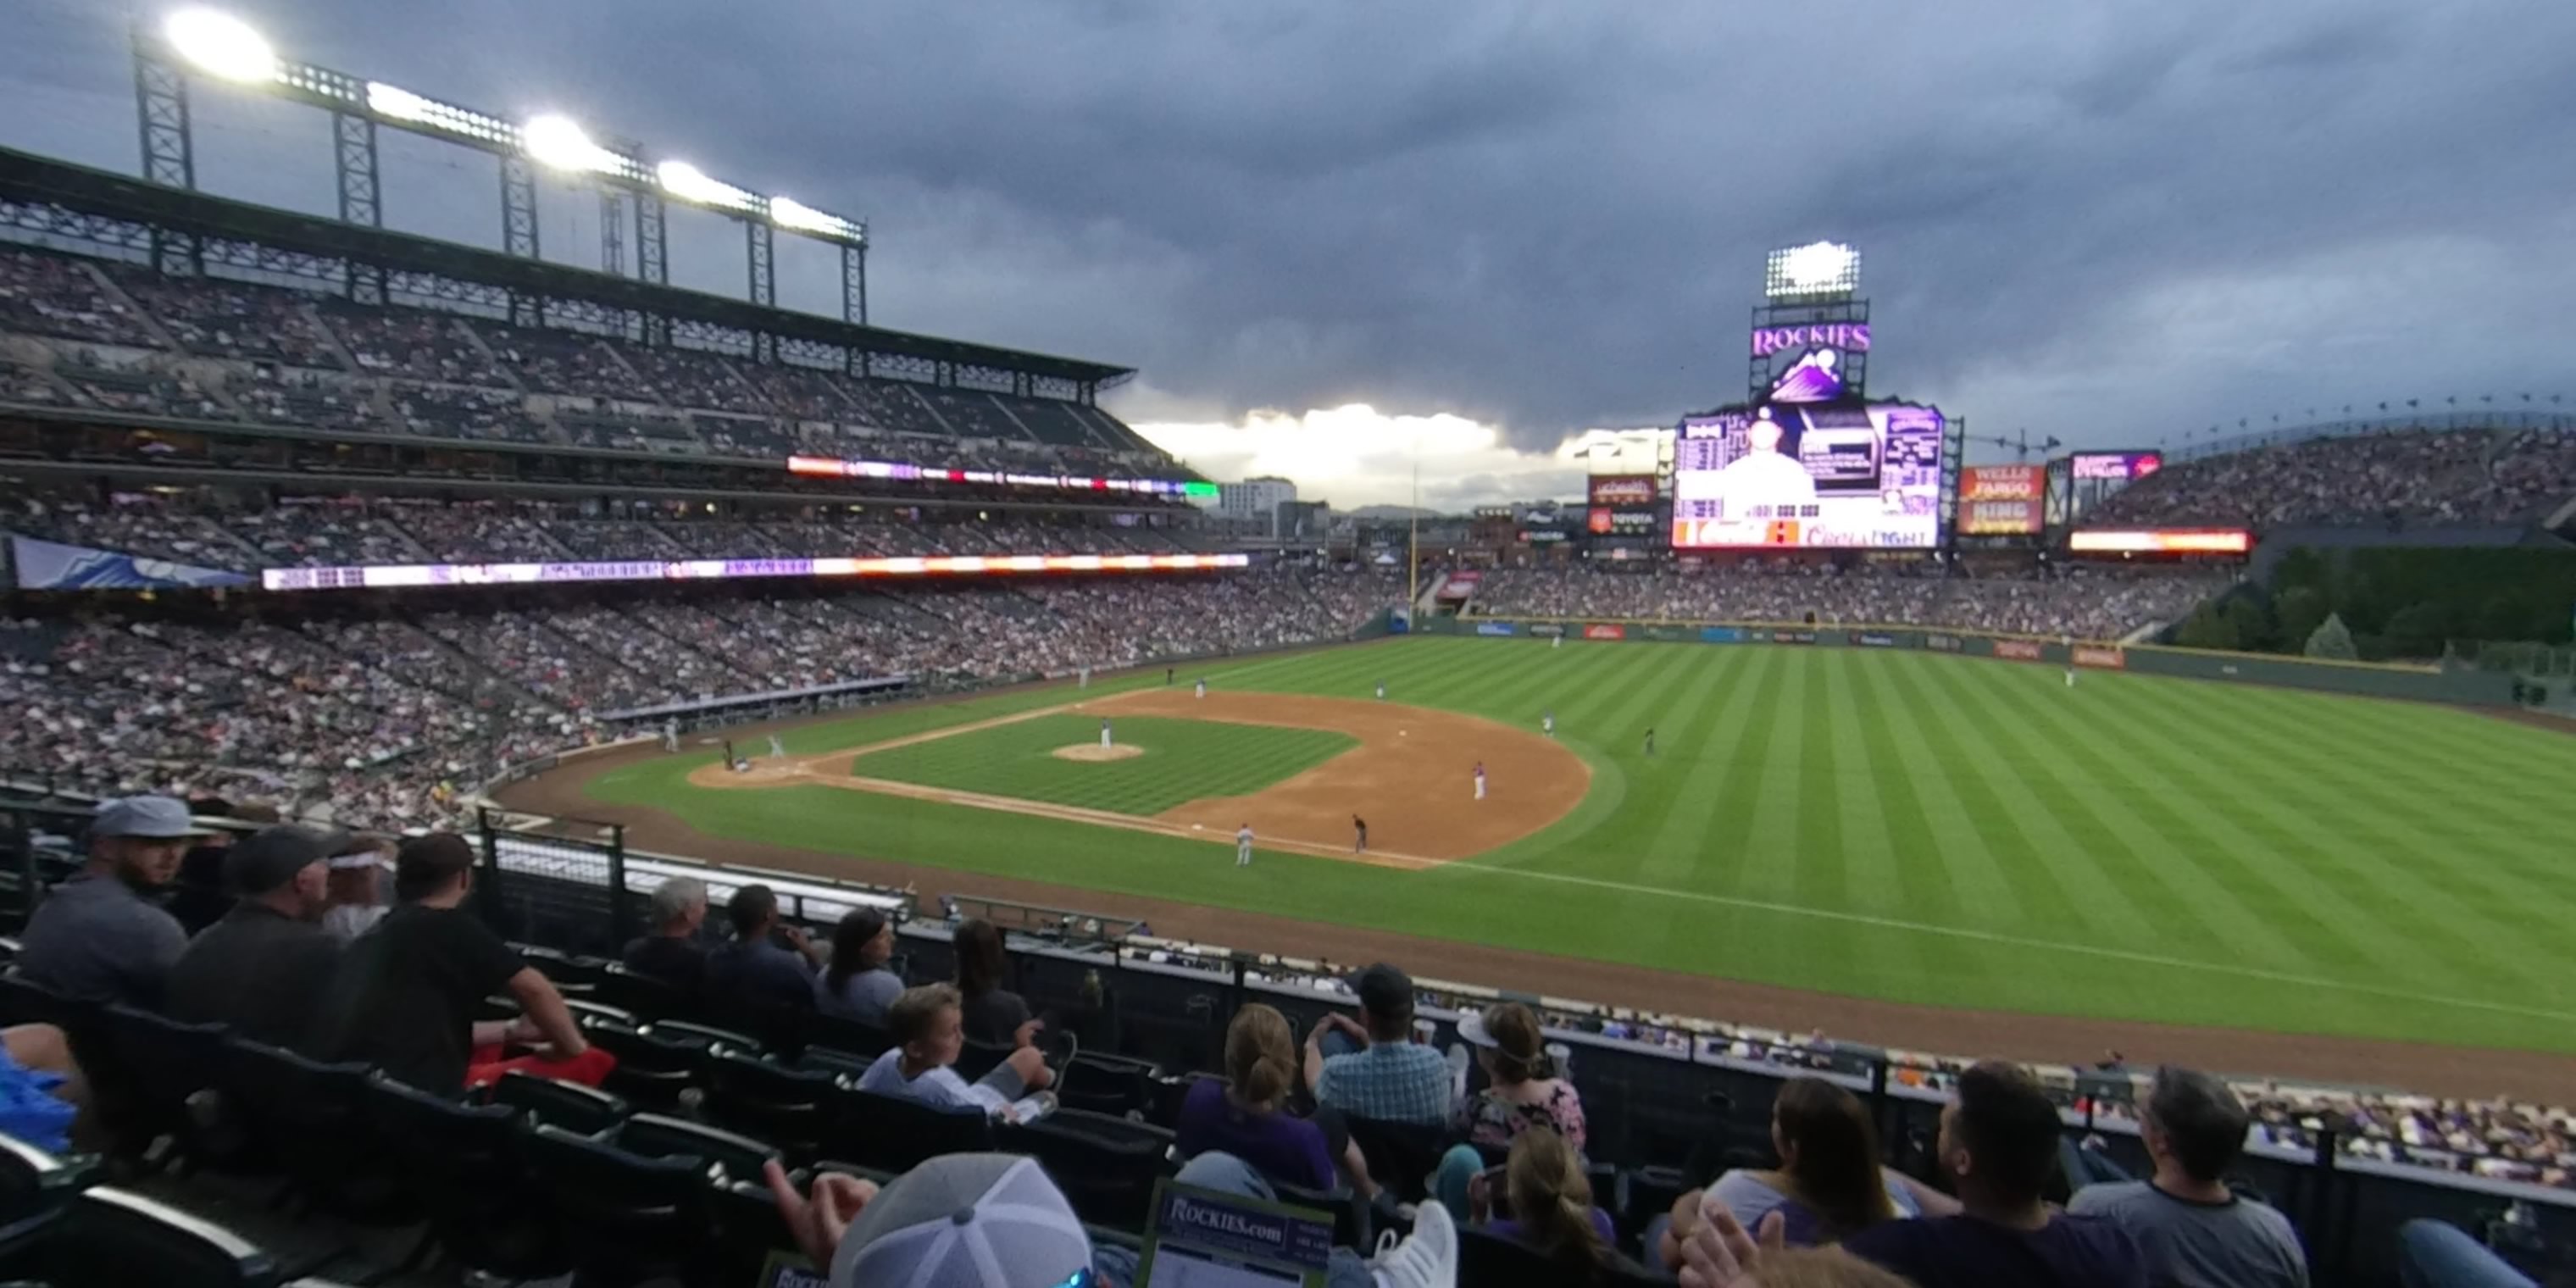 section 218 panoramic seat view  - coors field